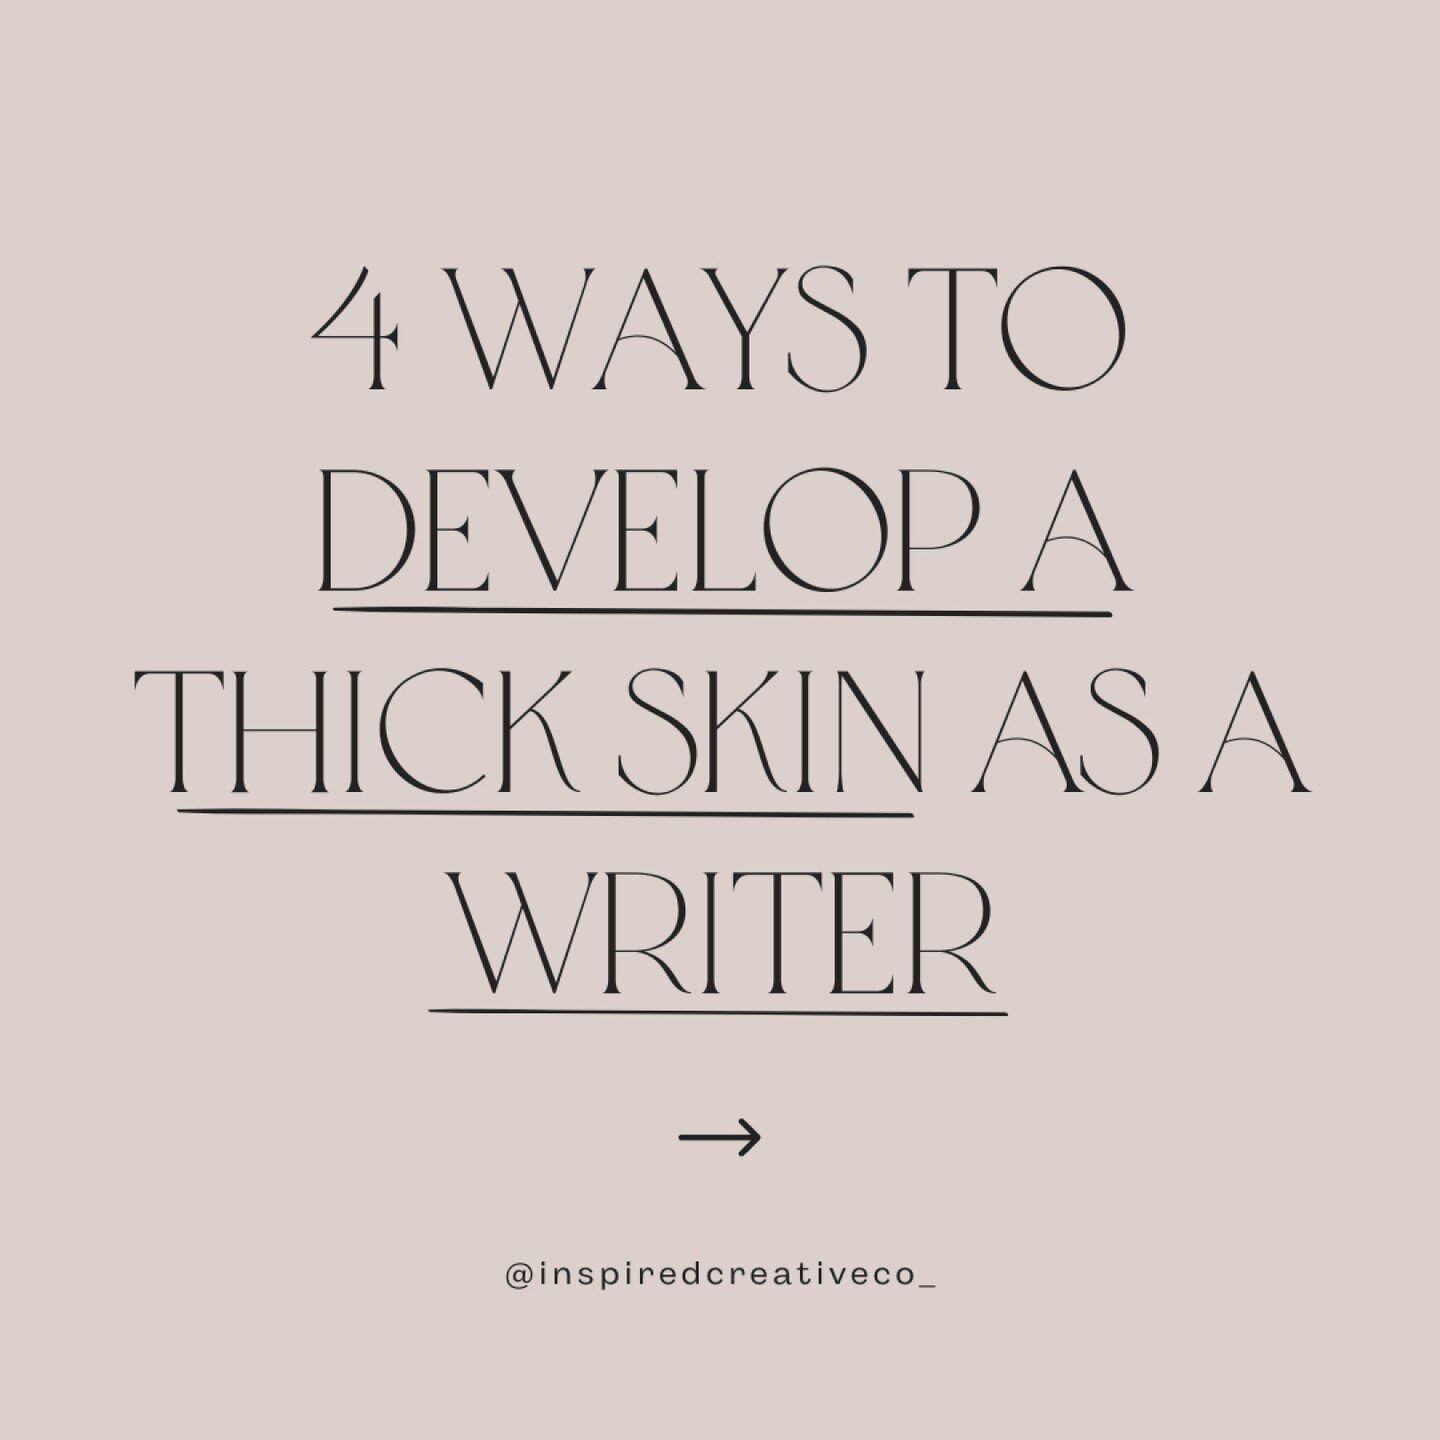 4 ways to develop a thick skin as a writer.

Let's be honest, having a thick skin when it comes to your book isn't always easy.

Your book is your pride and joy and something you've worked tirelessly on. The last thing you want is for someone to crit